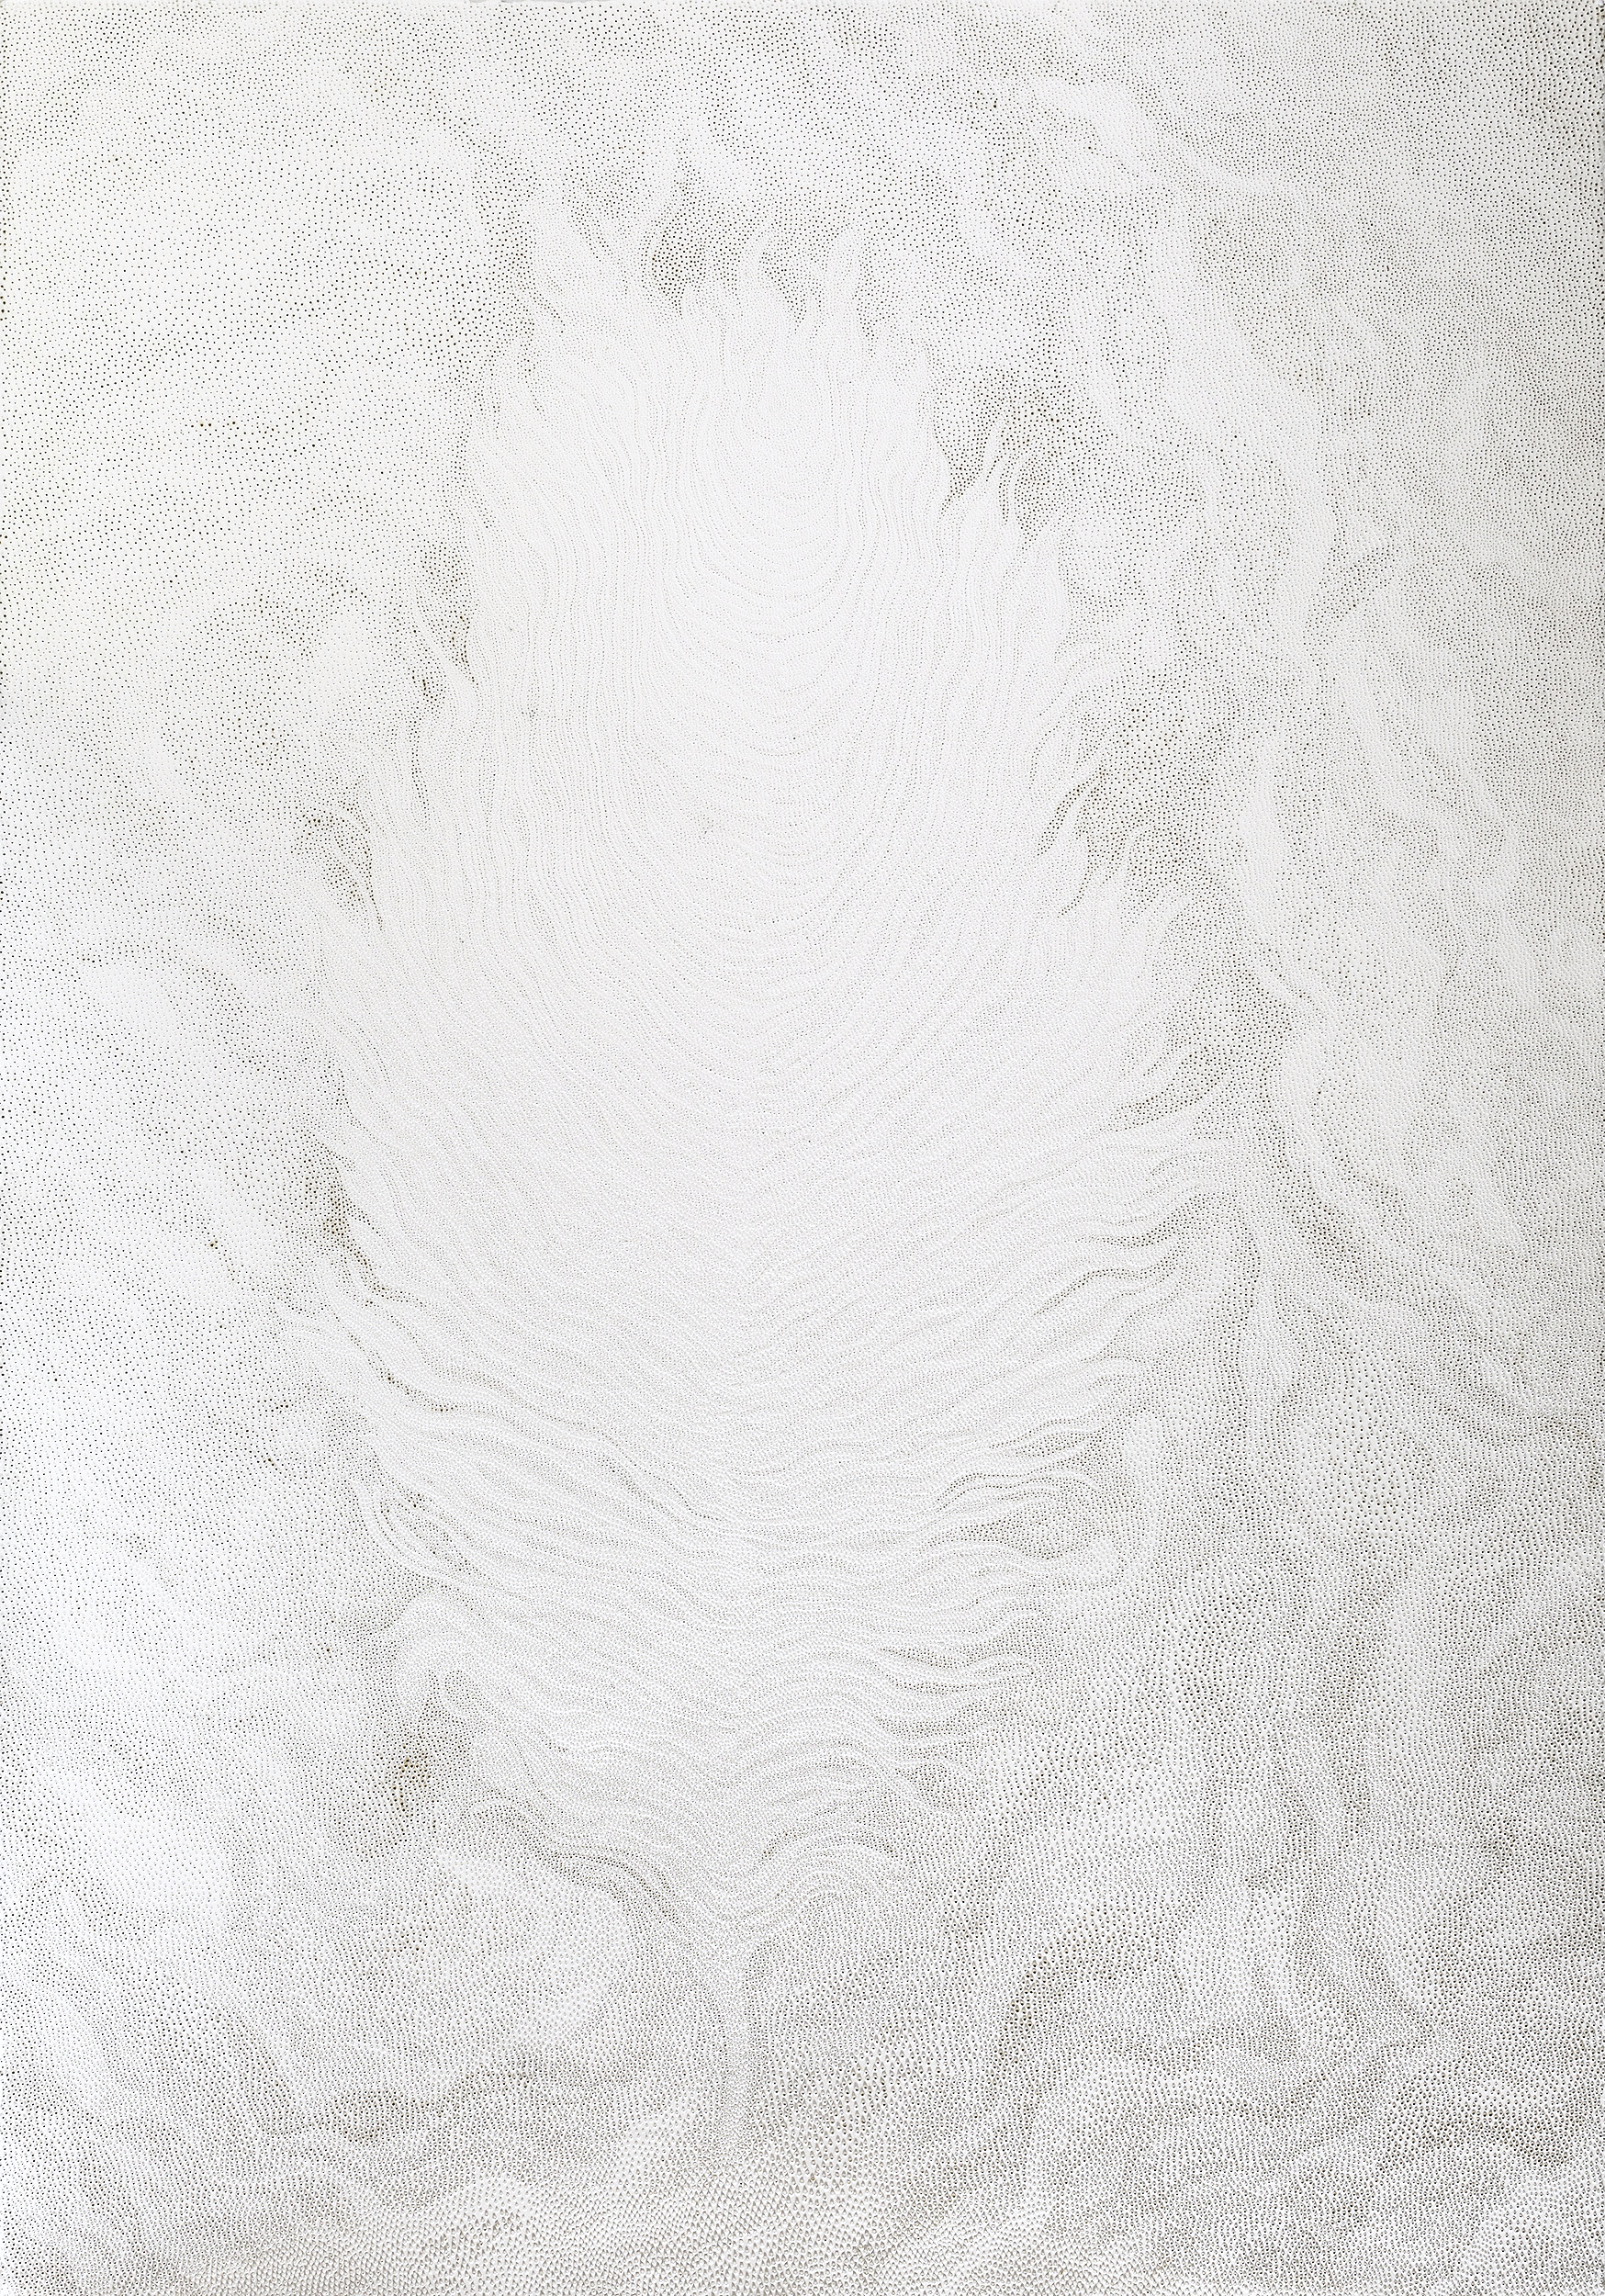 Melinda Schawel 'Let the Light In' (Side 1) perforated paper 152 x 106cm $13,000